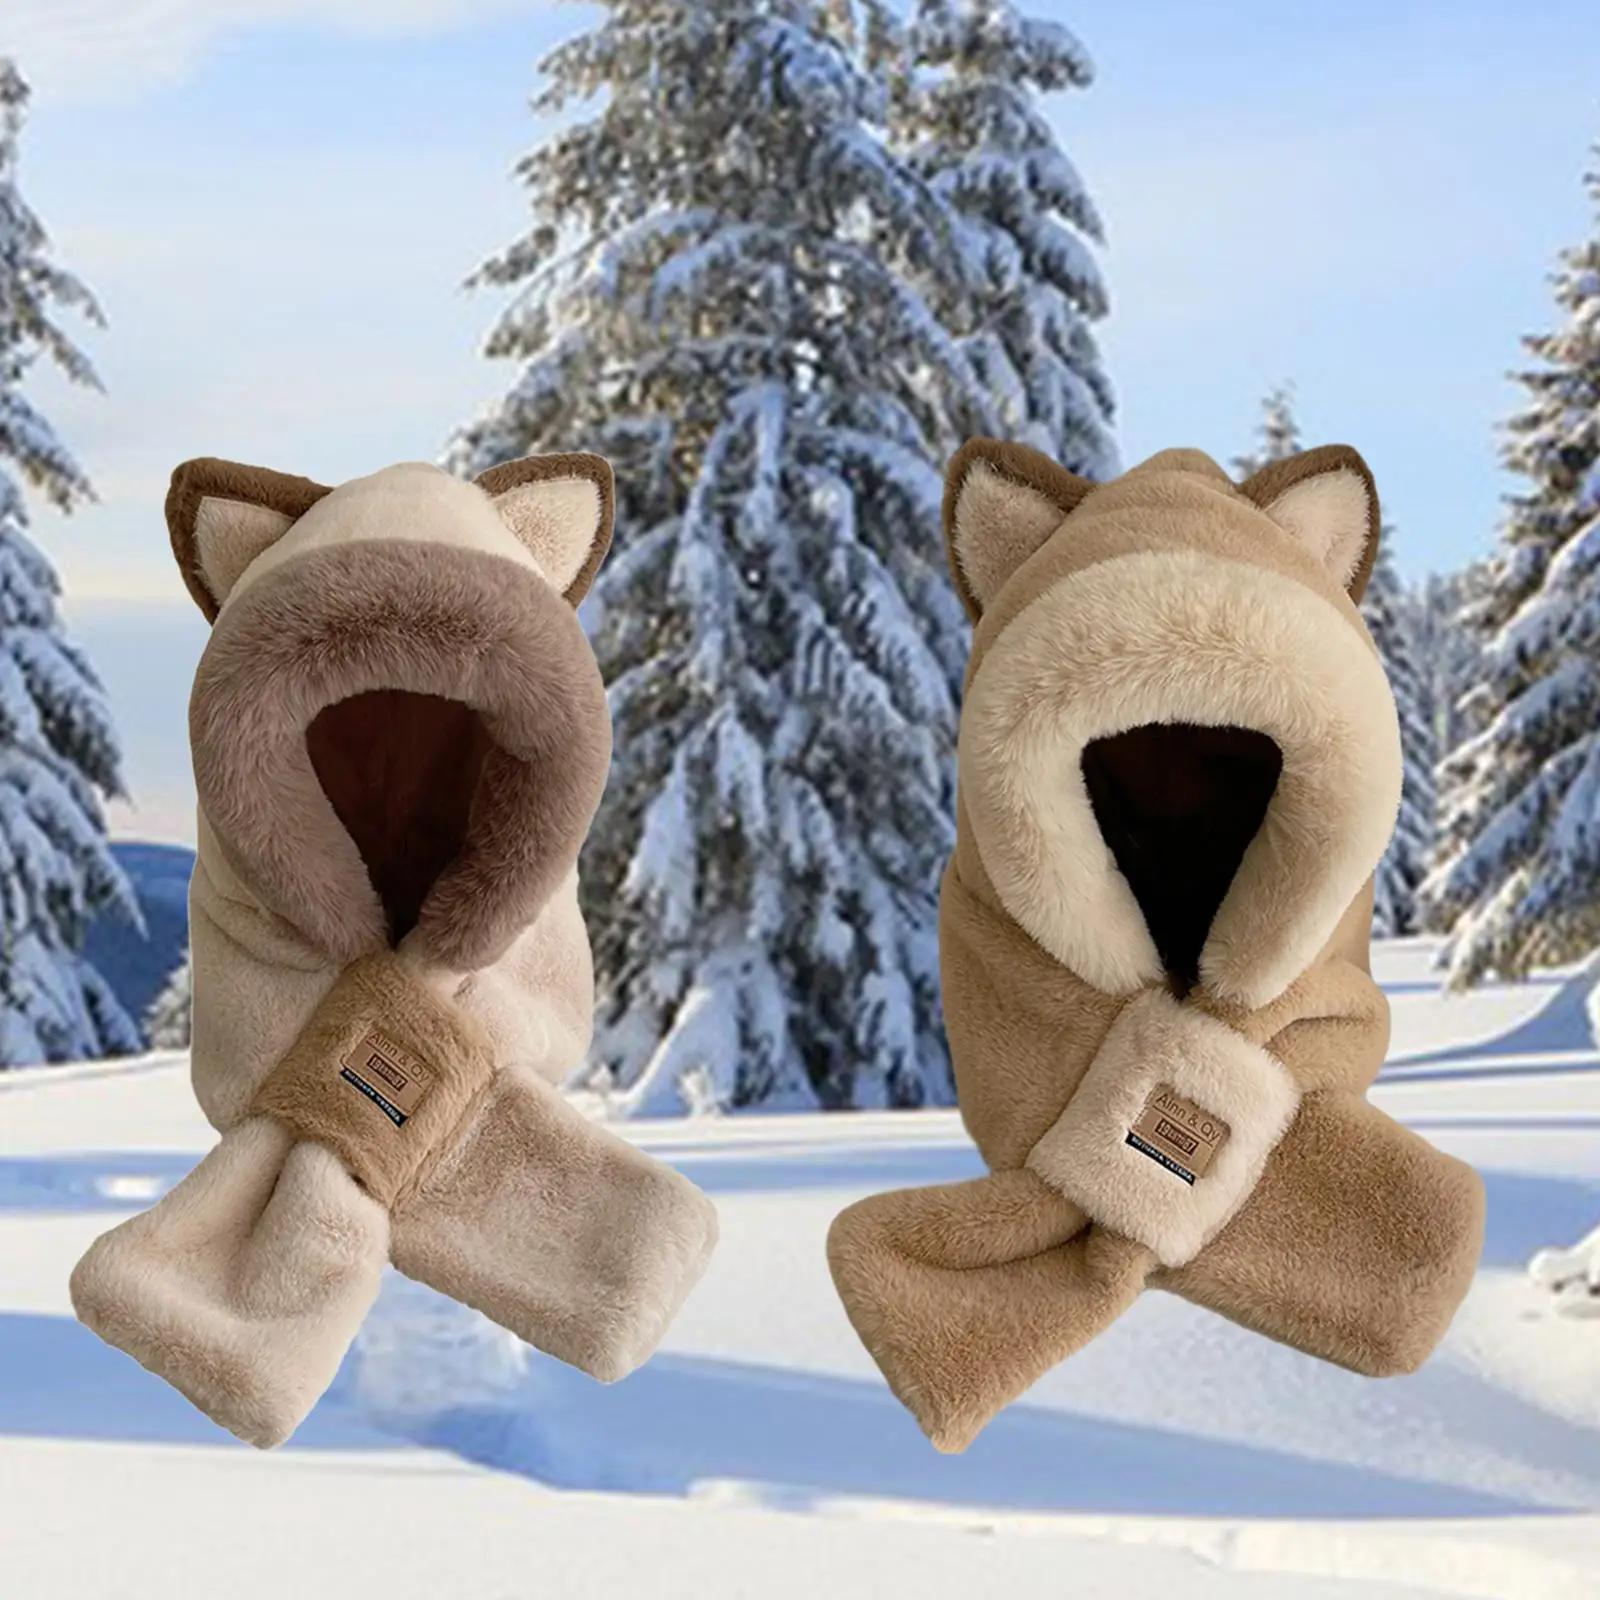 Plush Hooded Scarf Winter Hat Scarf Set Warm Windproof Casual Ear Protection Cap Costume Hats Animals Hat for Parties Outdoor